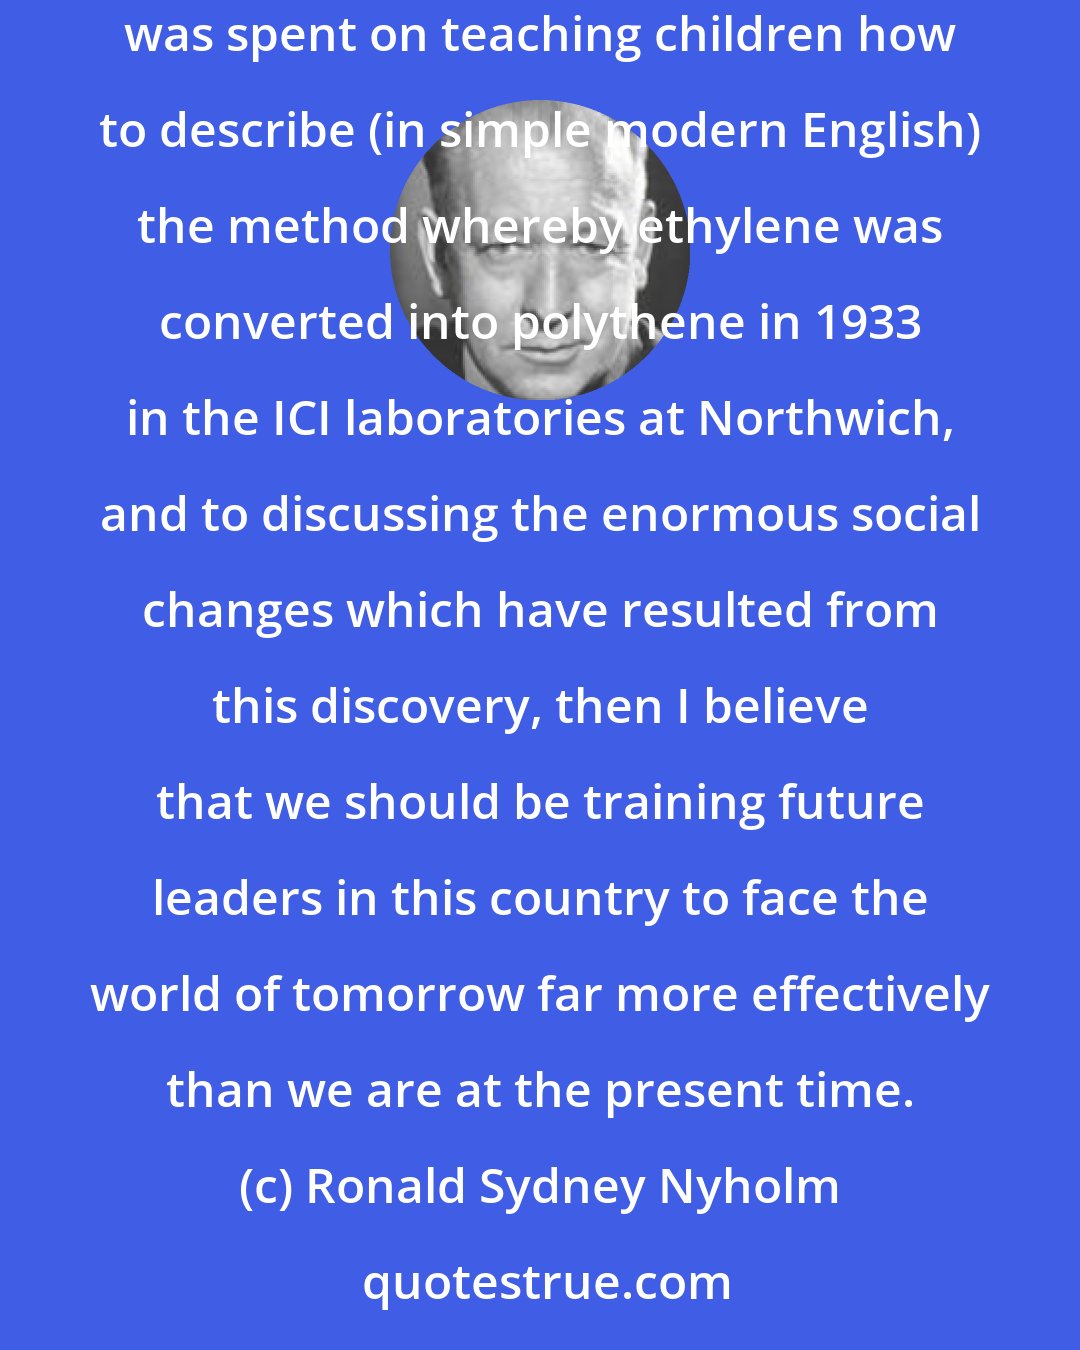 Ronald Sydney Nyholm: If a little less time was devoted to the translation of letters by Julius Caesar describing Britain 2000 years ago and a little more time was spent on teaching children how to describe (in simple modern English) the method whereby ethylene was converted into polythene in 1933 in the ICI laboratories at Northwich, and to discussing the enormous social changes which have resulted from this discovery, then I believe that we should be training future leaders in this country to face the world of tomorrow far more effectively than we are at the present time.